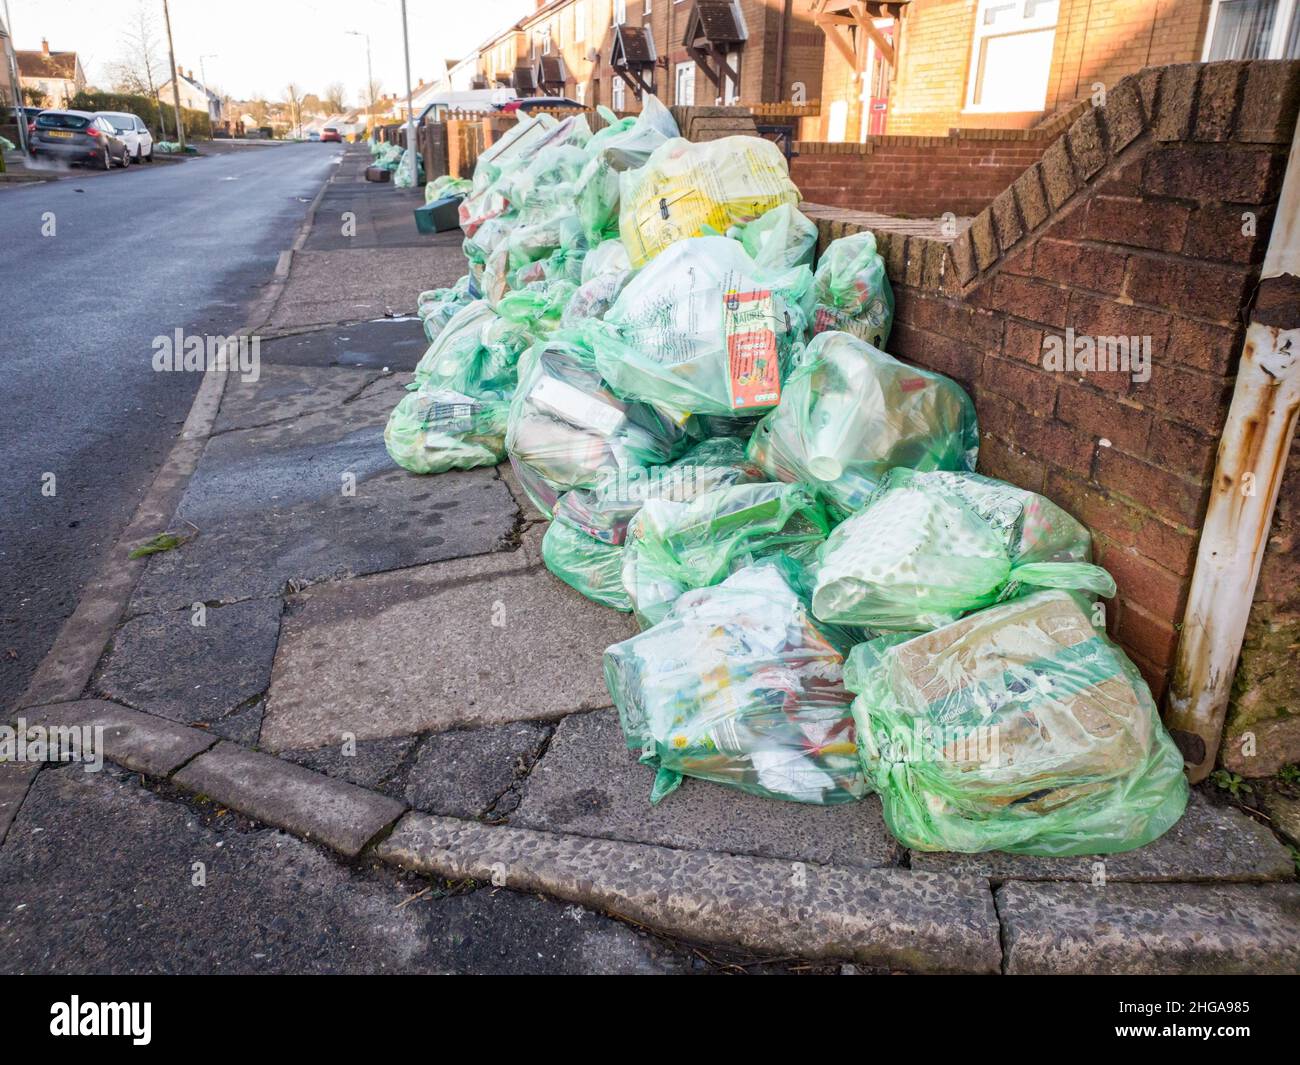 Lots of full recycling bags in a residential area street, ready for collection by the waste collectors, pile of garbage bags on sidewalk. Swansea, Wales, UK - January 17, 20222 Stock Photo